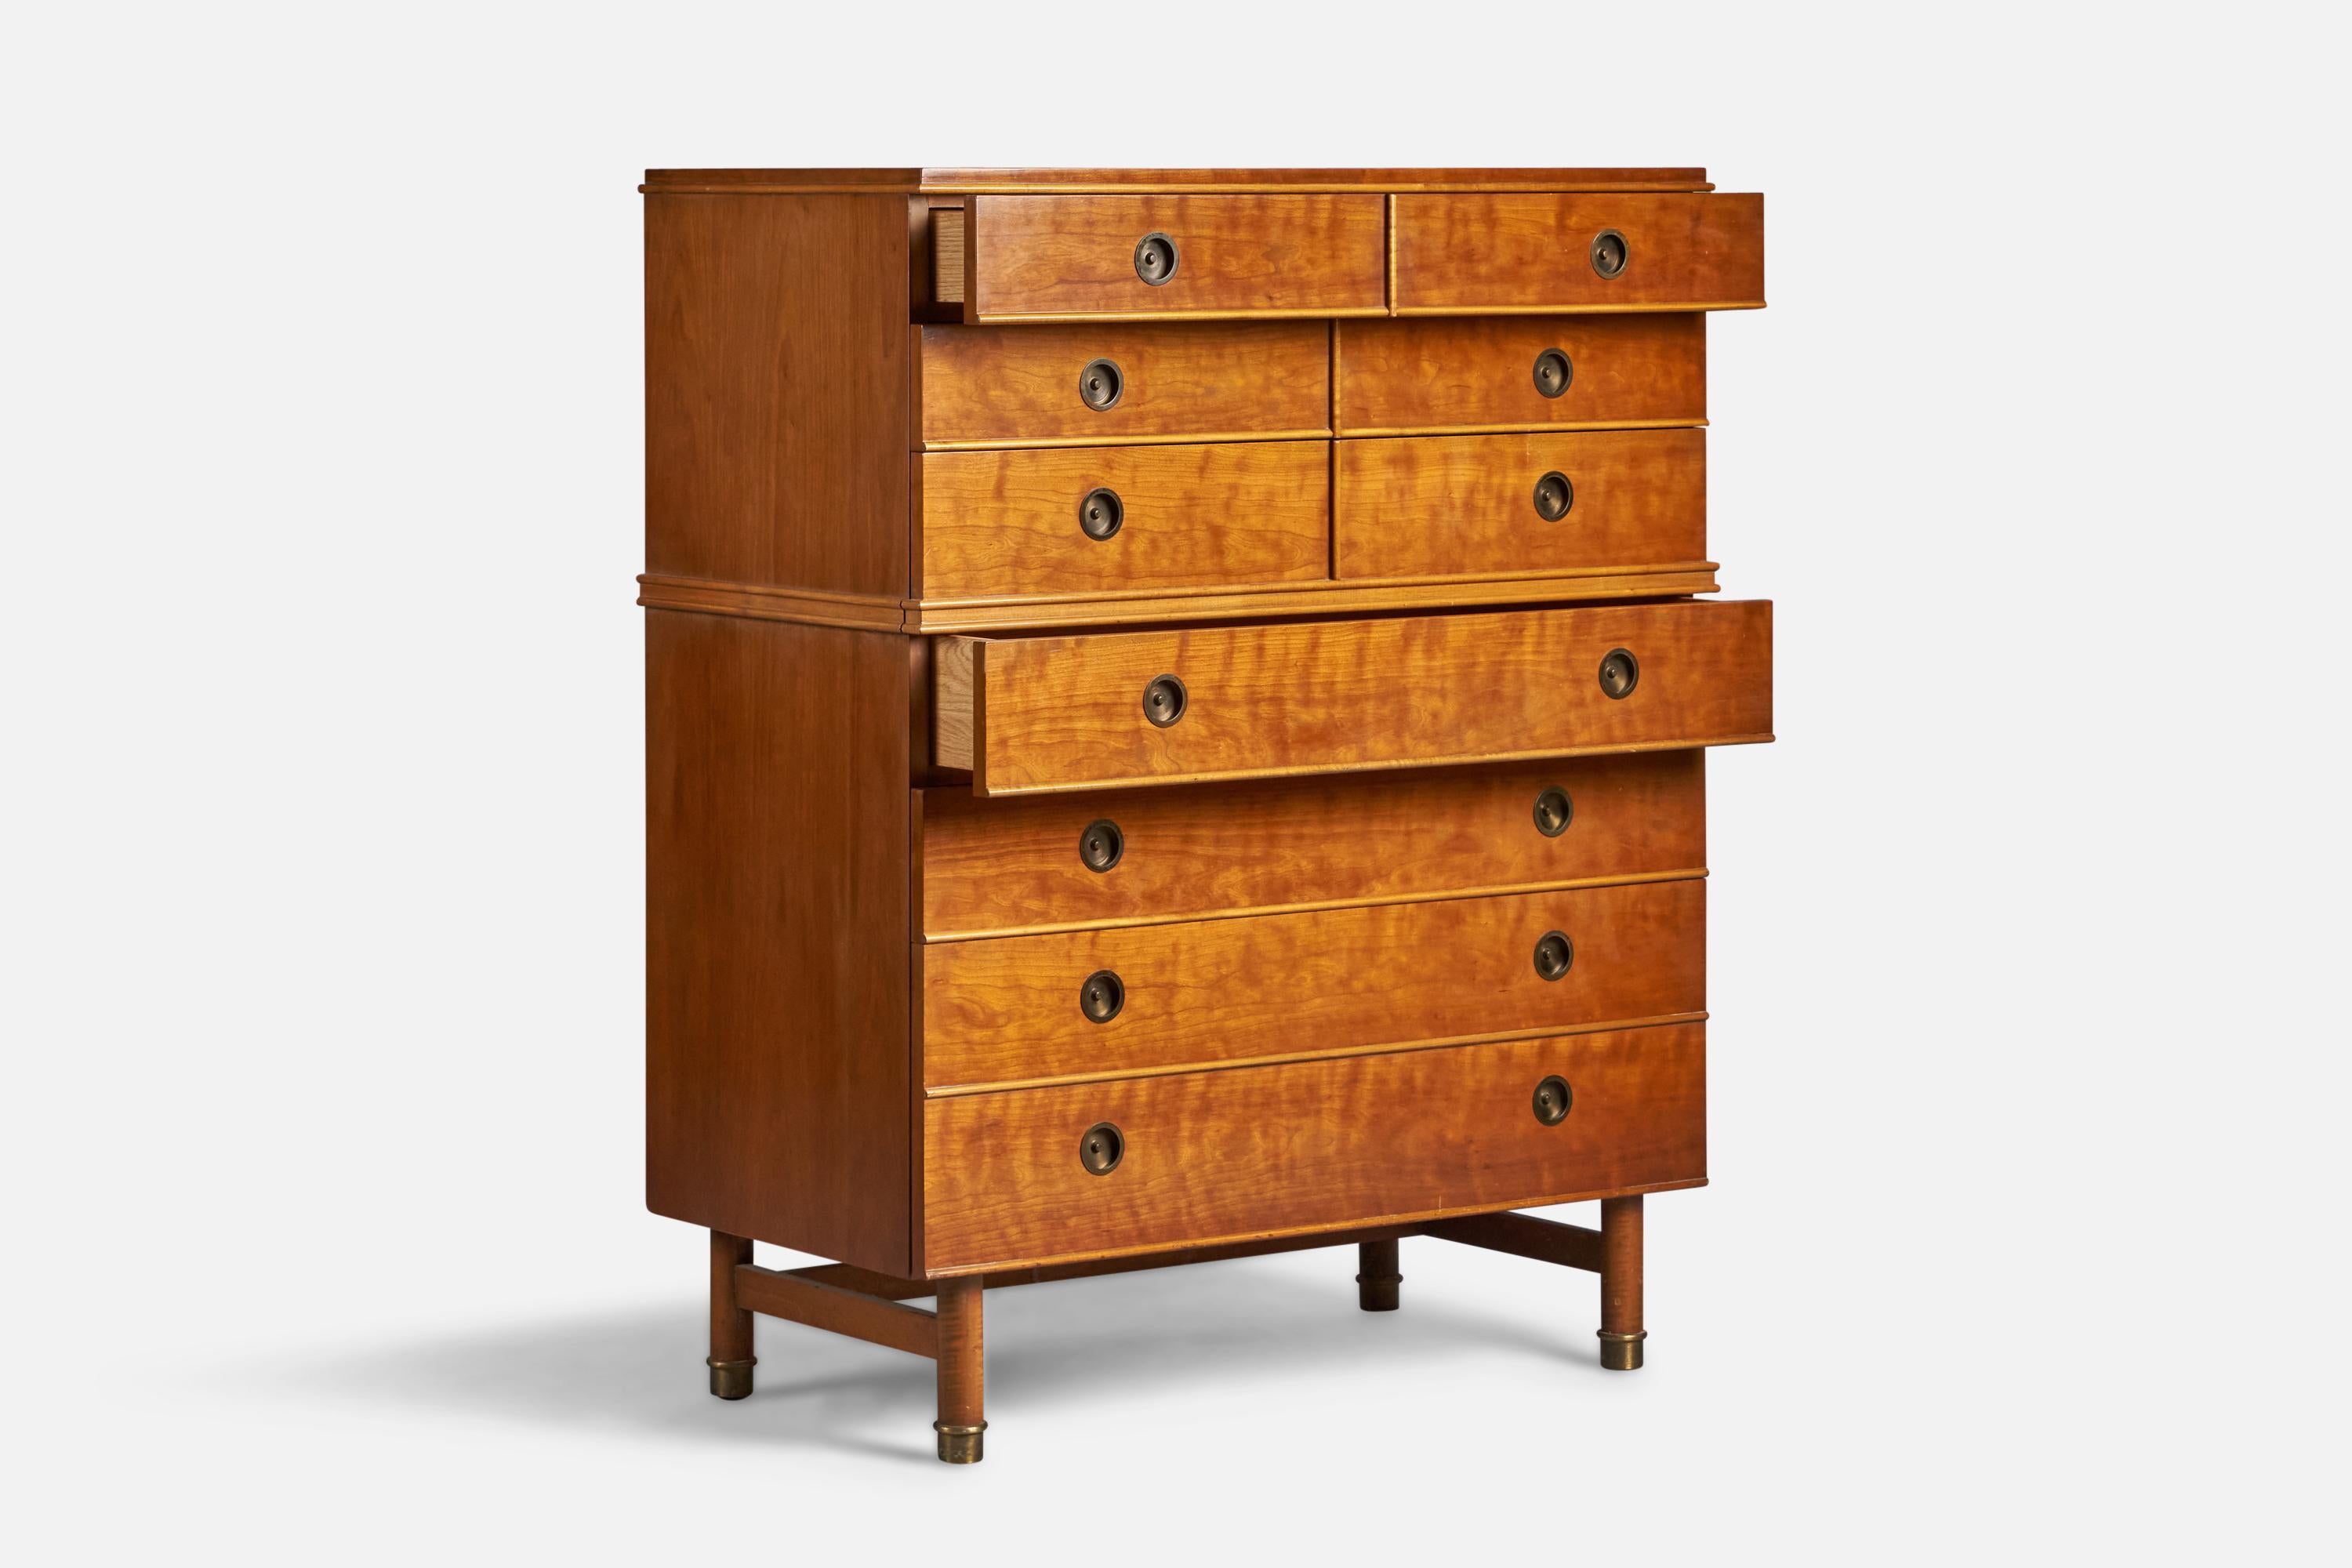 Mid-Century Modern Renzo Rutili, Chest of Drawers, Mahogany, Maple, Brass, USA, 1950s For Sale